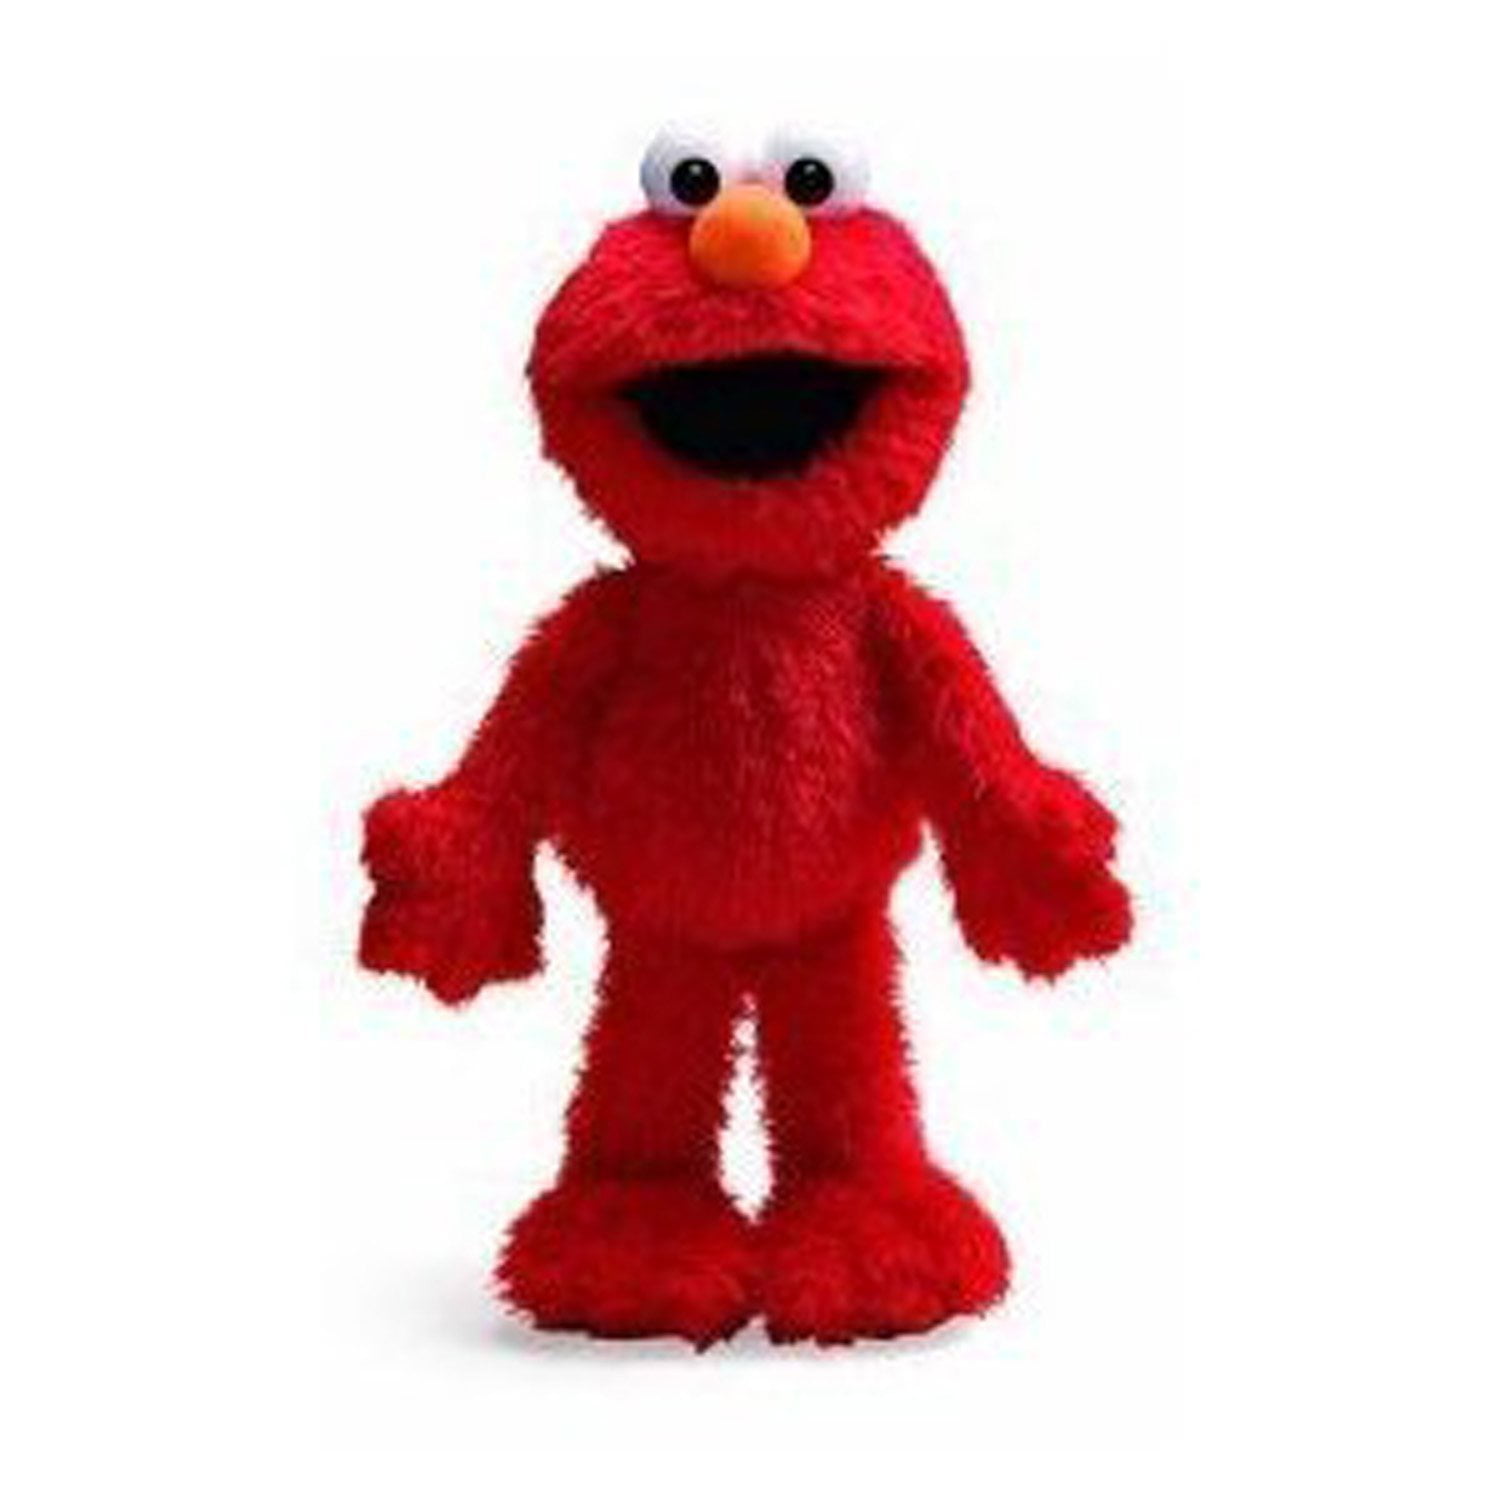 Hasbro C0923 Tickle Me Elmo Plush Toy Red for sale online 